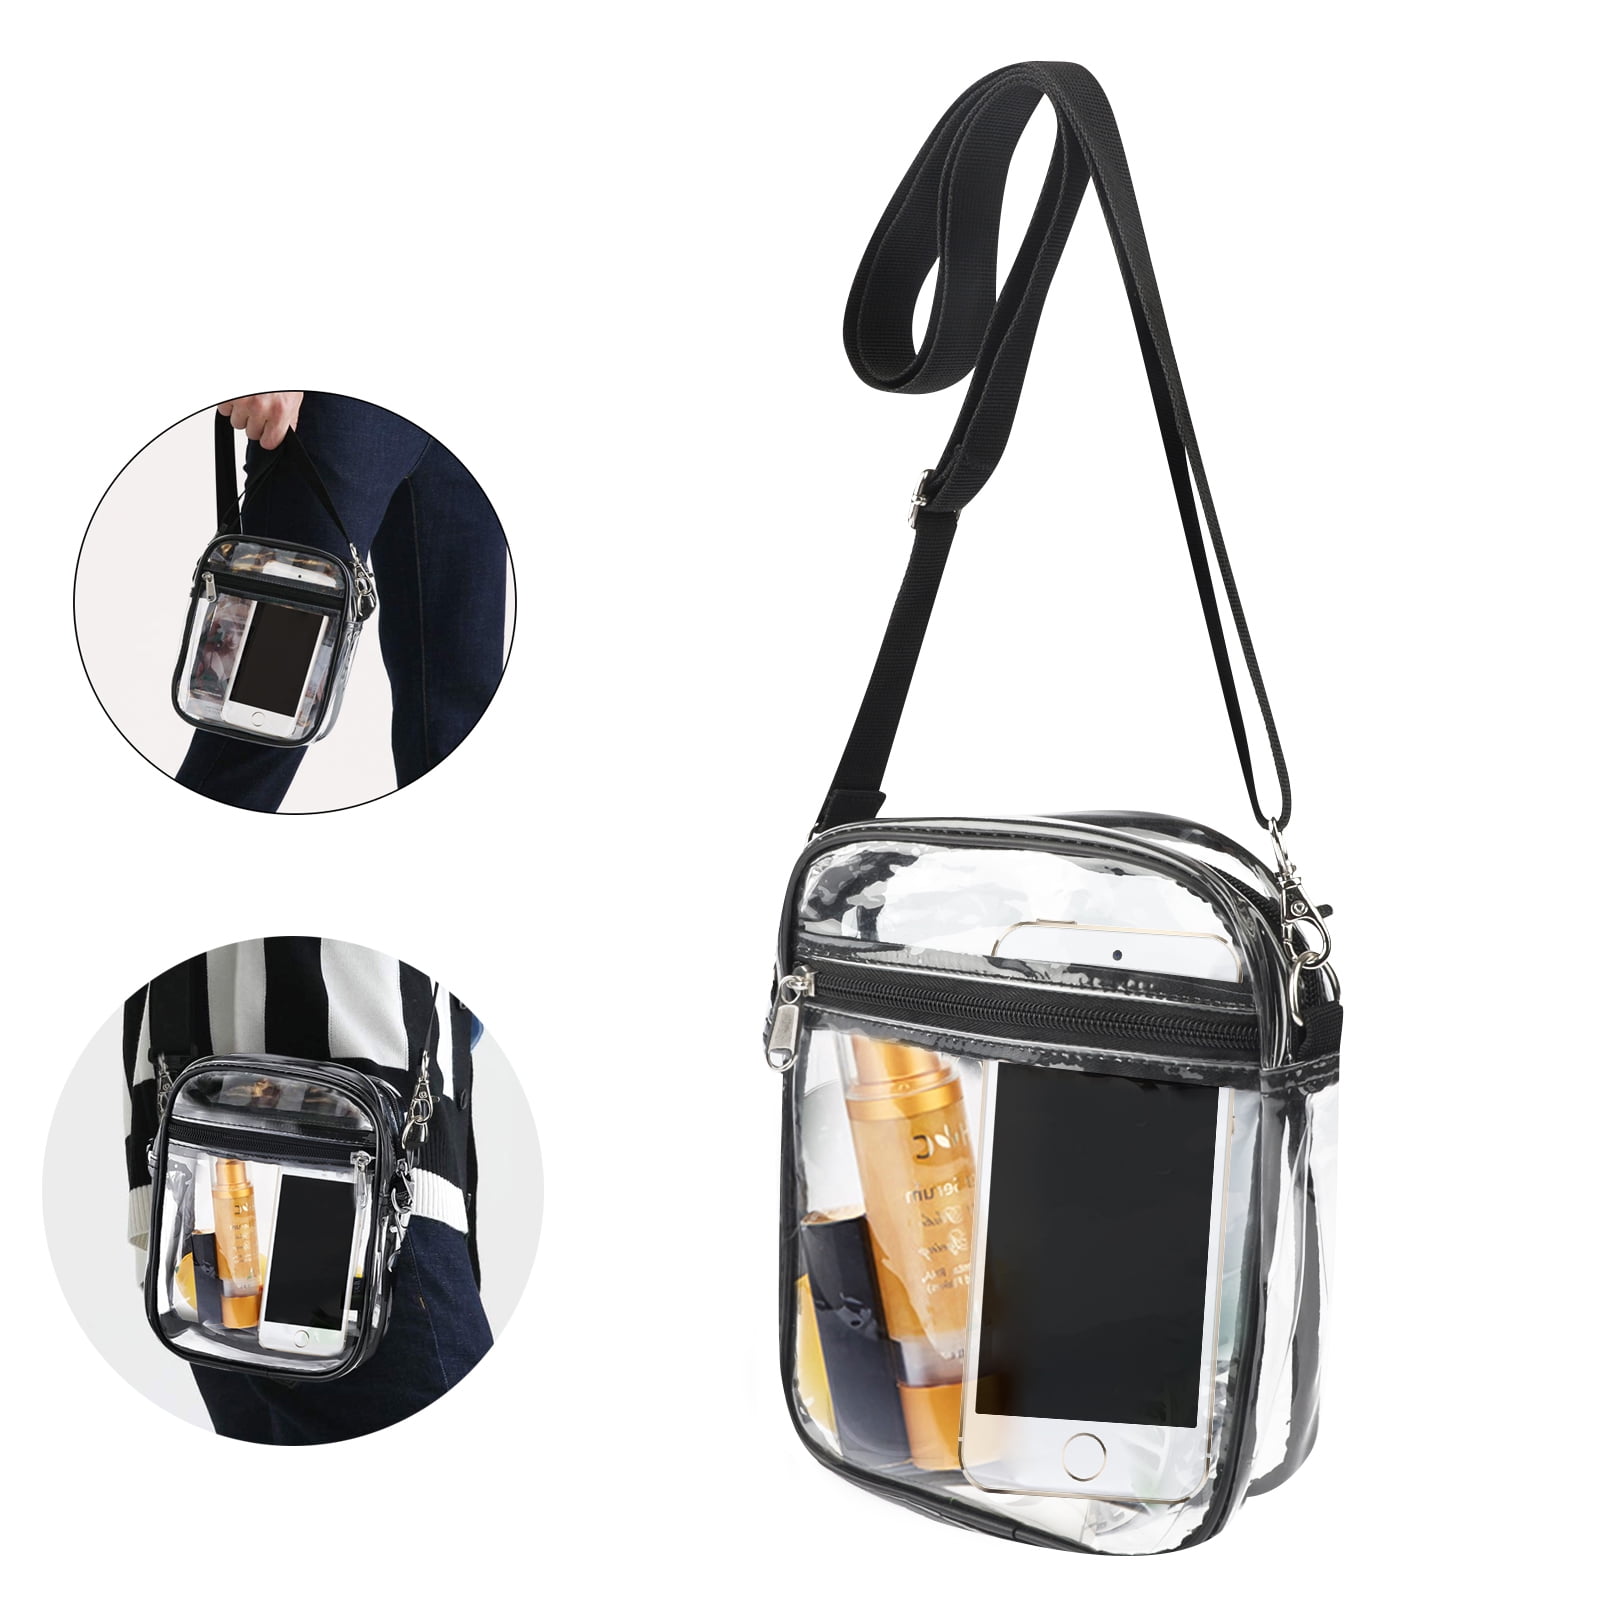 TSV Clear Crossbody Bag, Stadium Approved Shoulder Purse with Adjustable  Strap, Waterproof Transparent Tote Bag